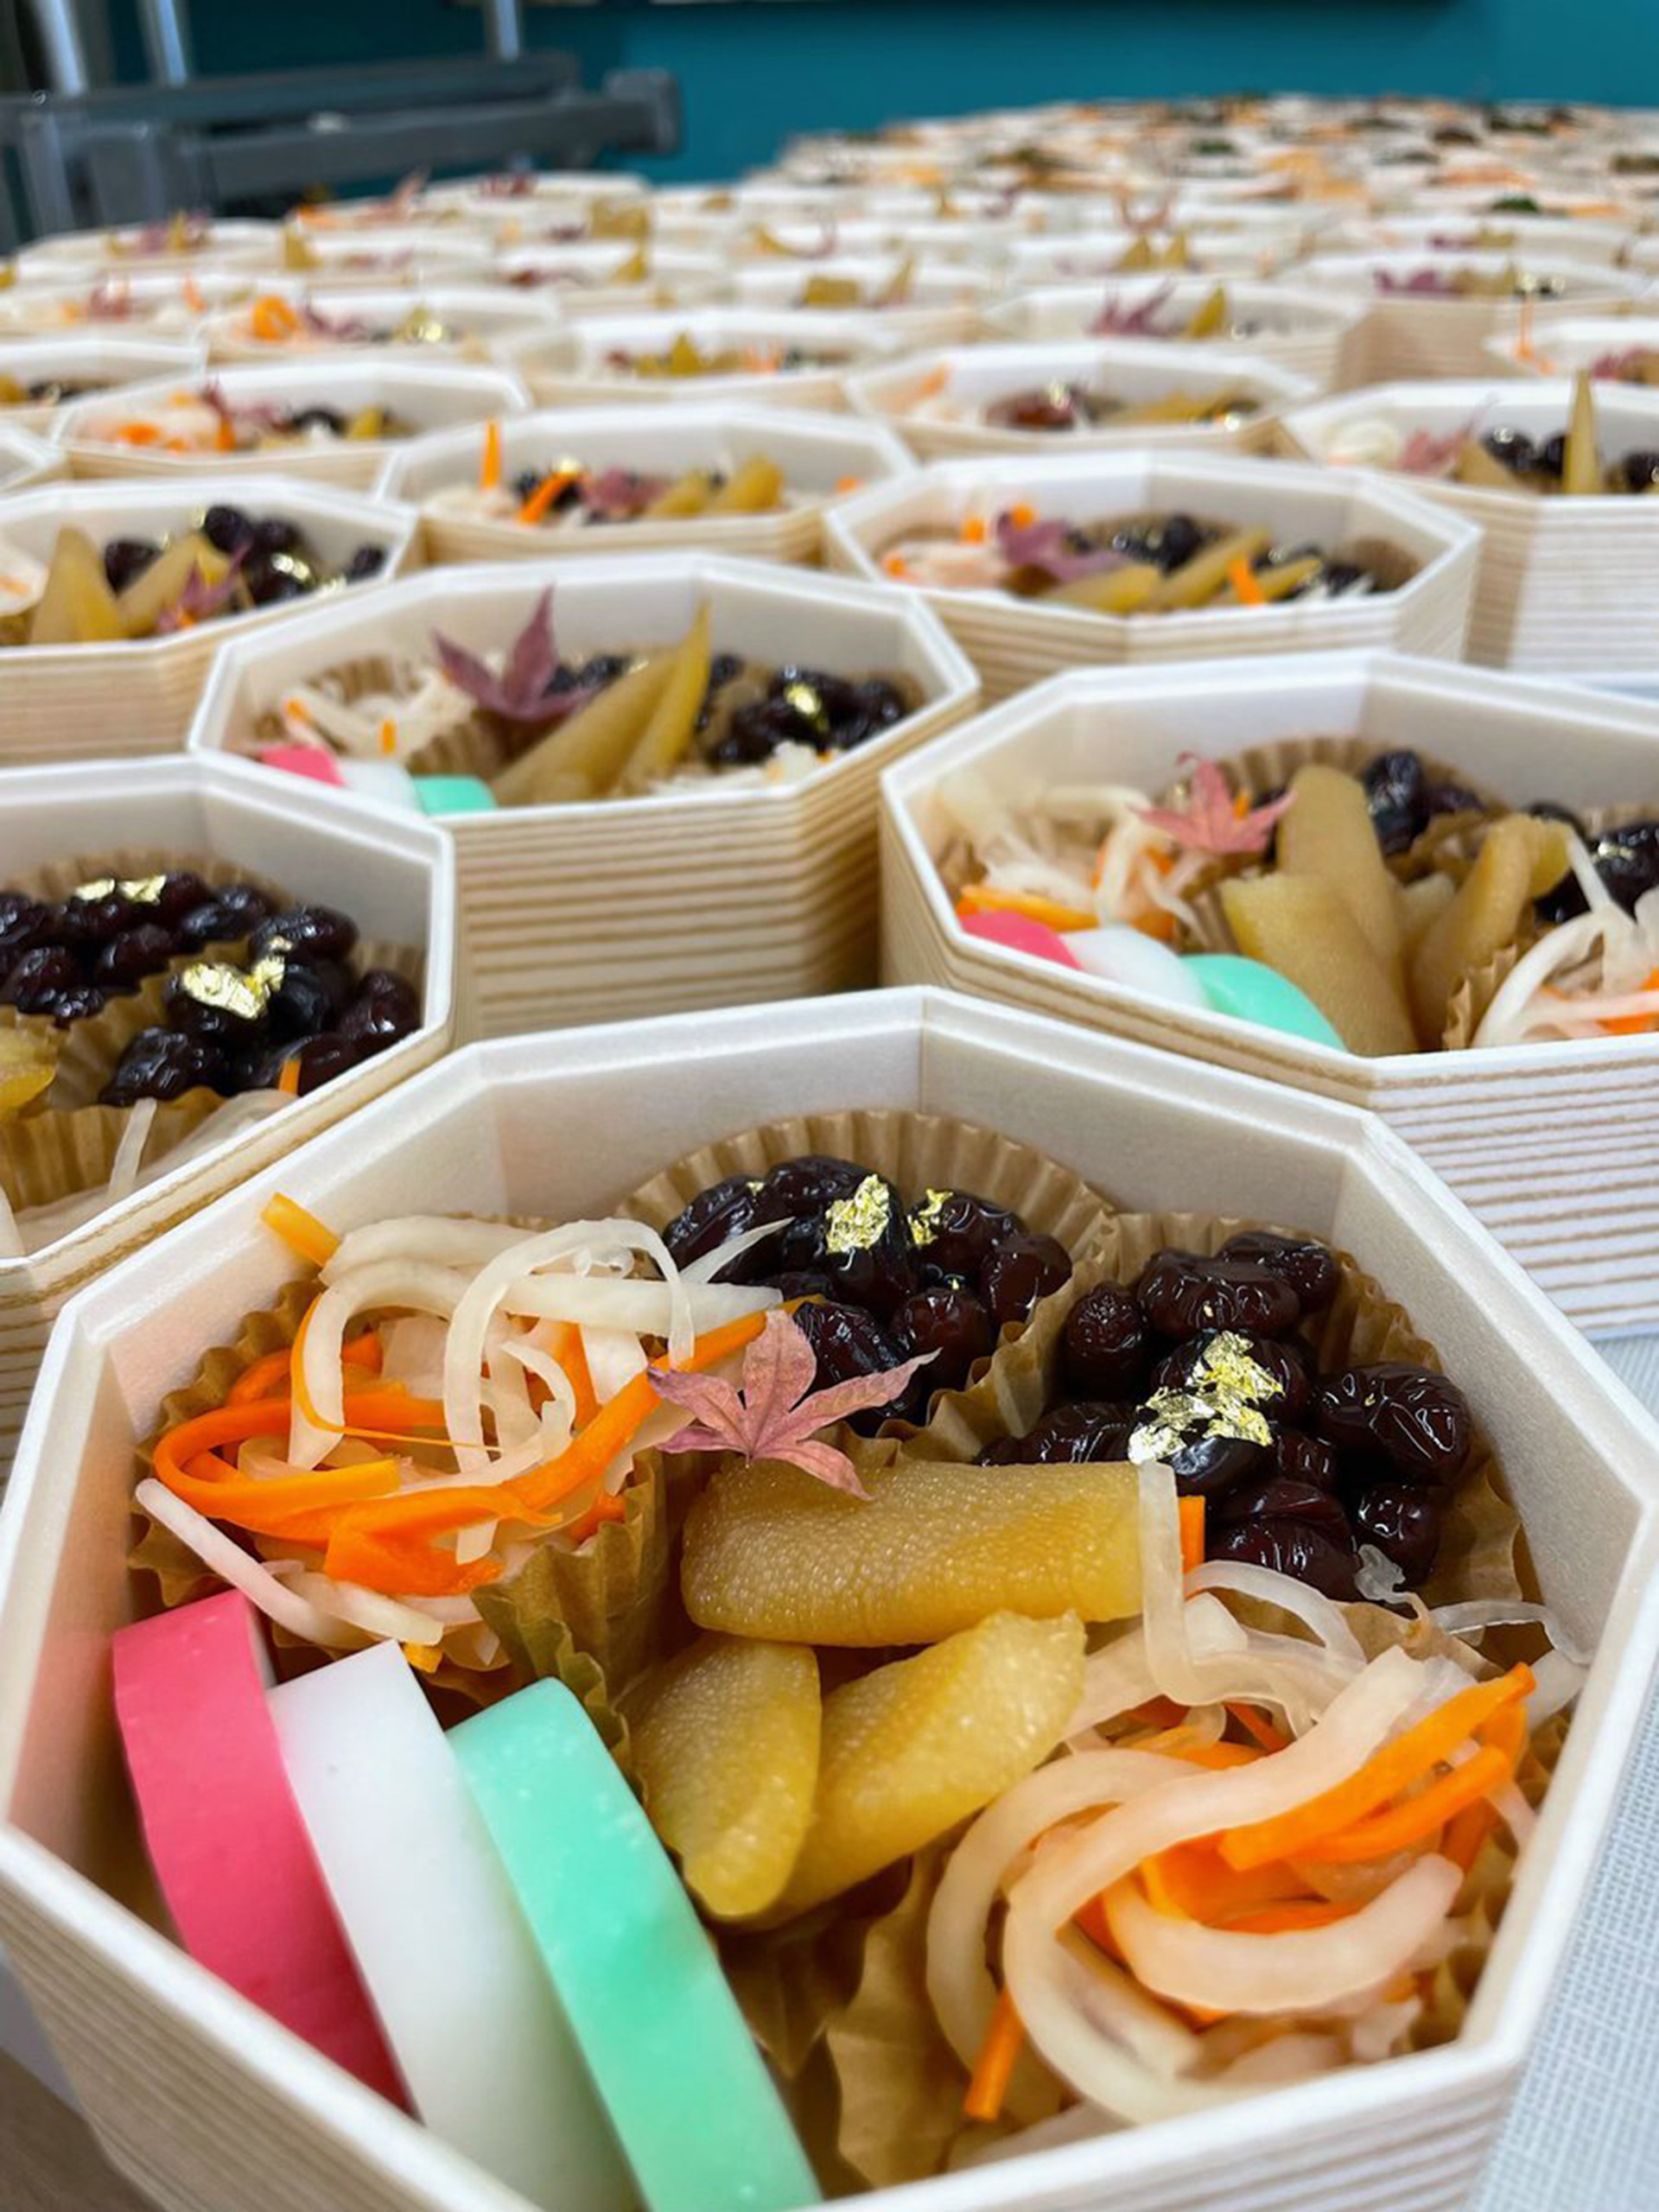 Many wooden boxes filled with traditional Japanese New Year's dishes, including colorful fish cakes, daikon and carrot salad, and sweet black soybeans.